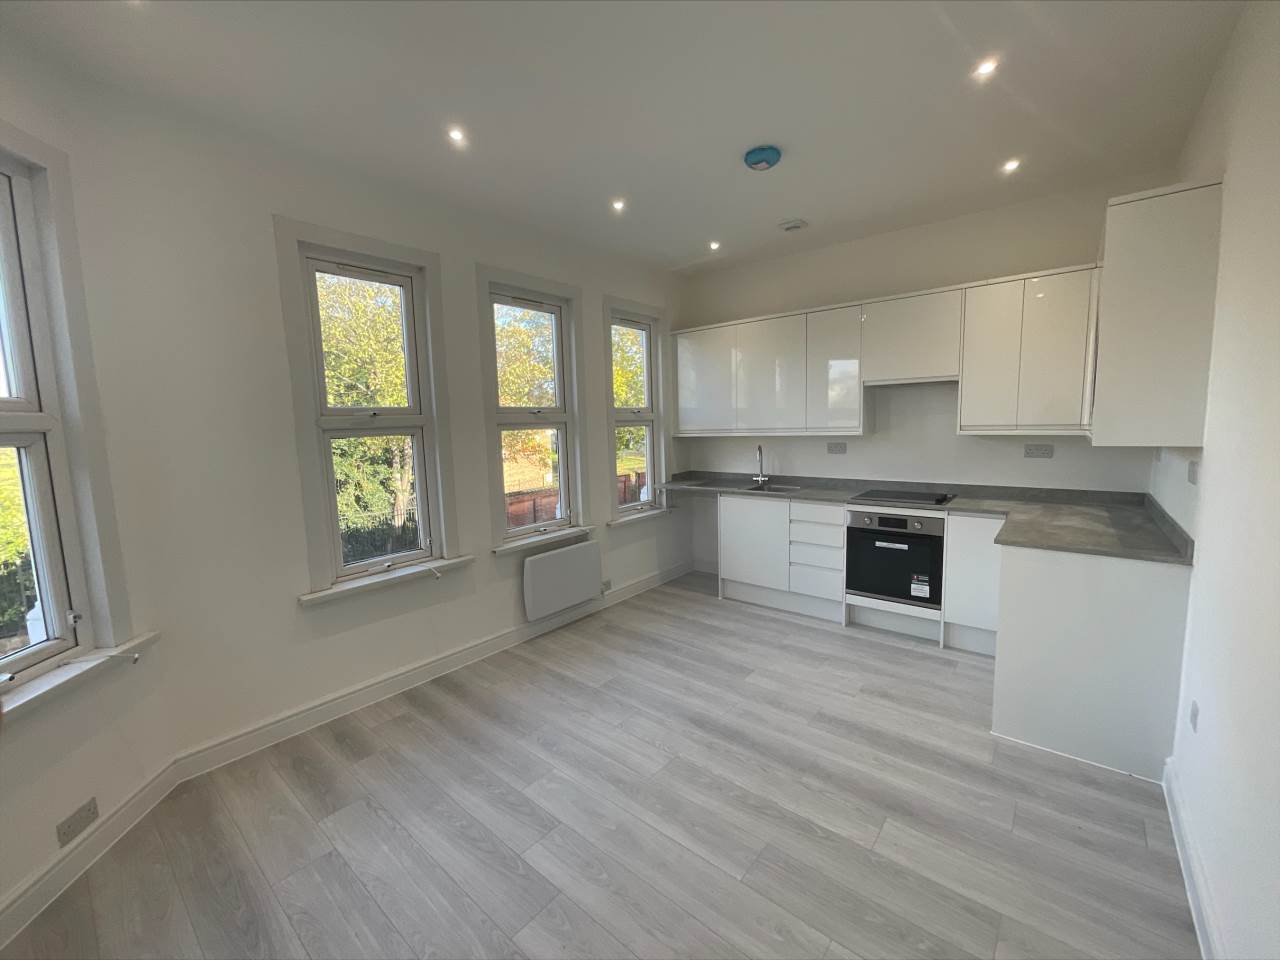 1 bed flat to rent in Bed Ground Floor Front Portway, Stratford, E15 